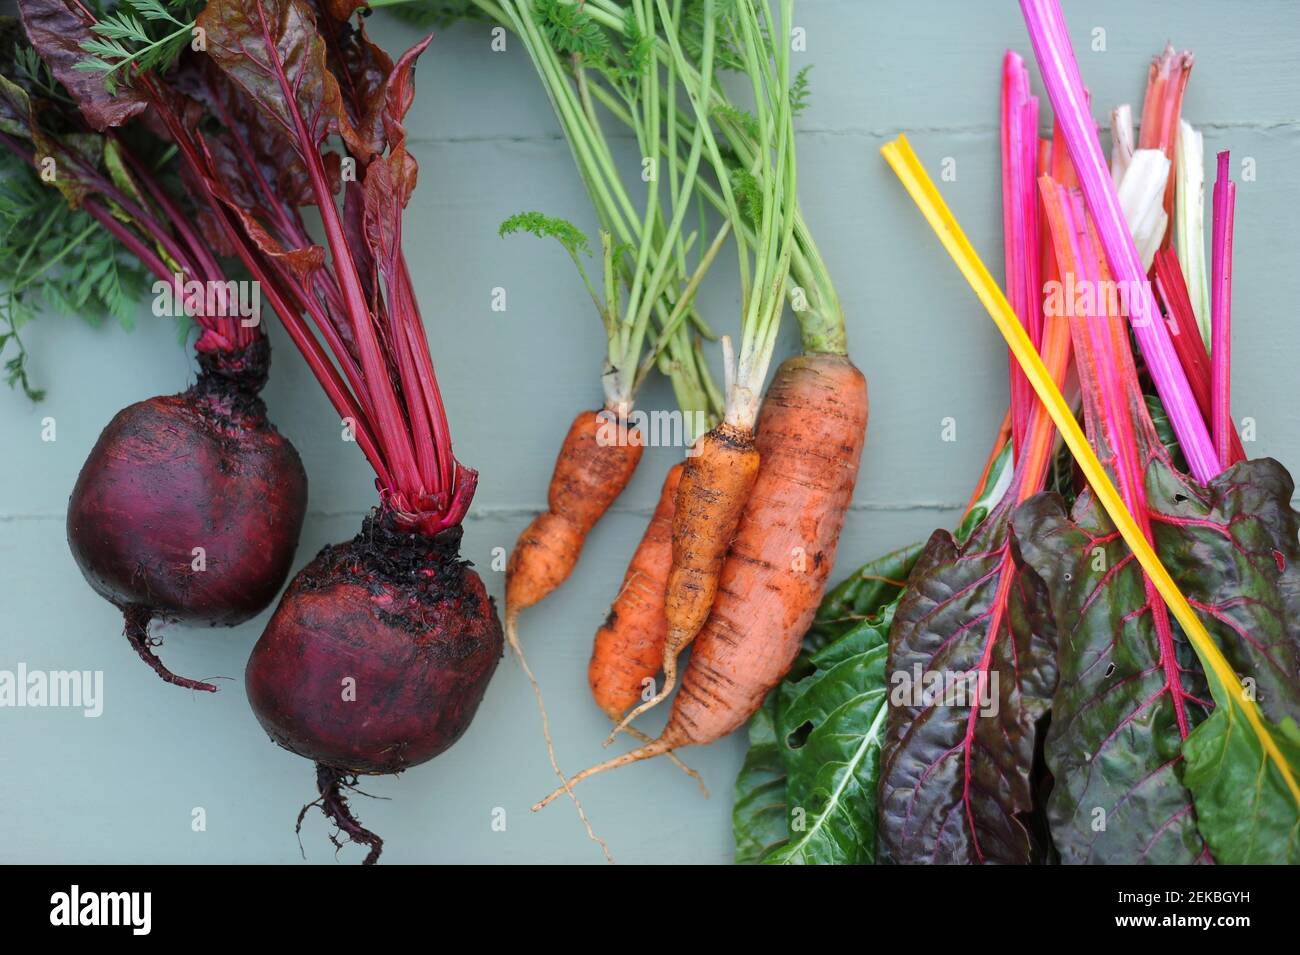 Freshly picked carrots, chard and beetroots Stock Photo